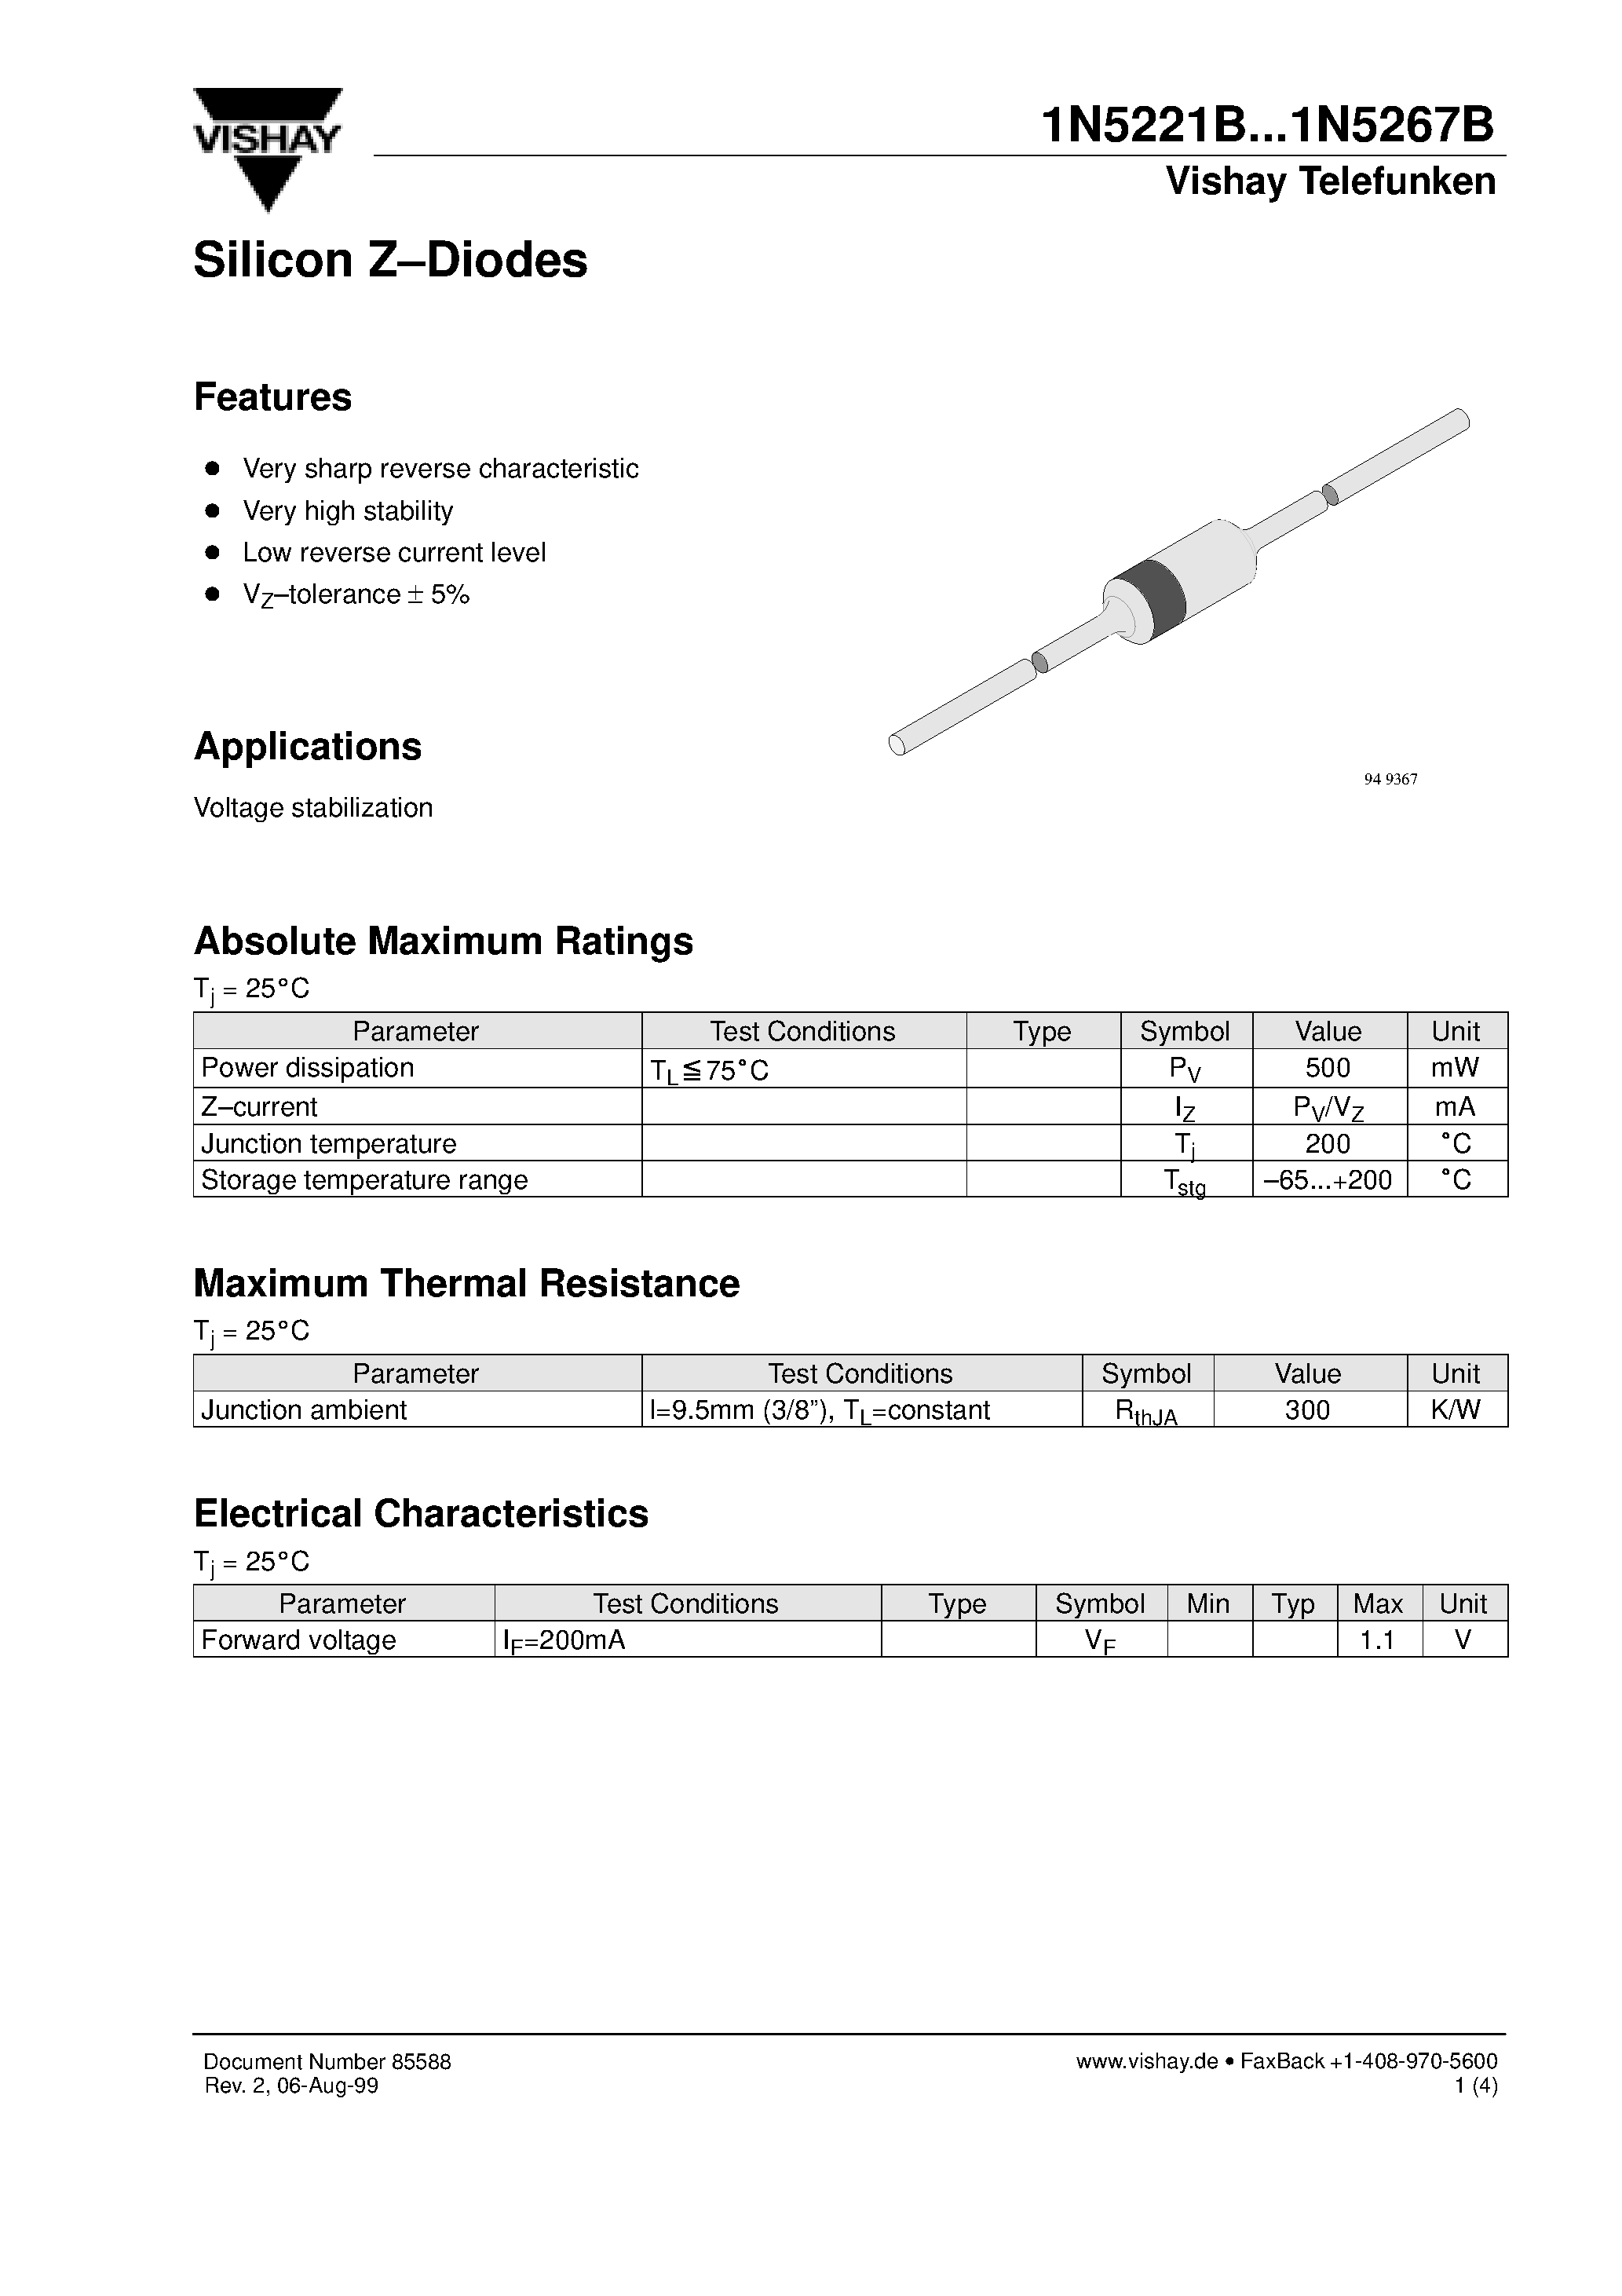 Datasheet 1N5231B - Silicon Z-Diodes page 1